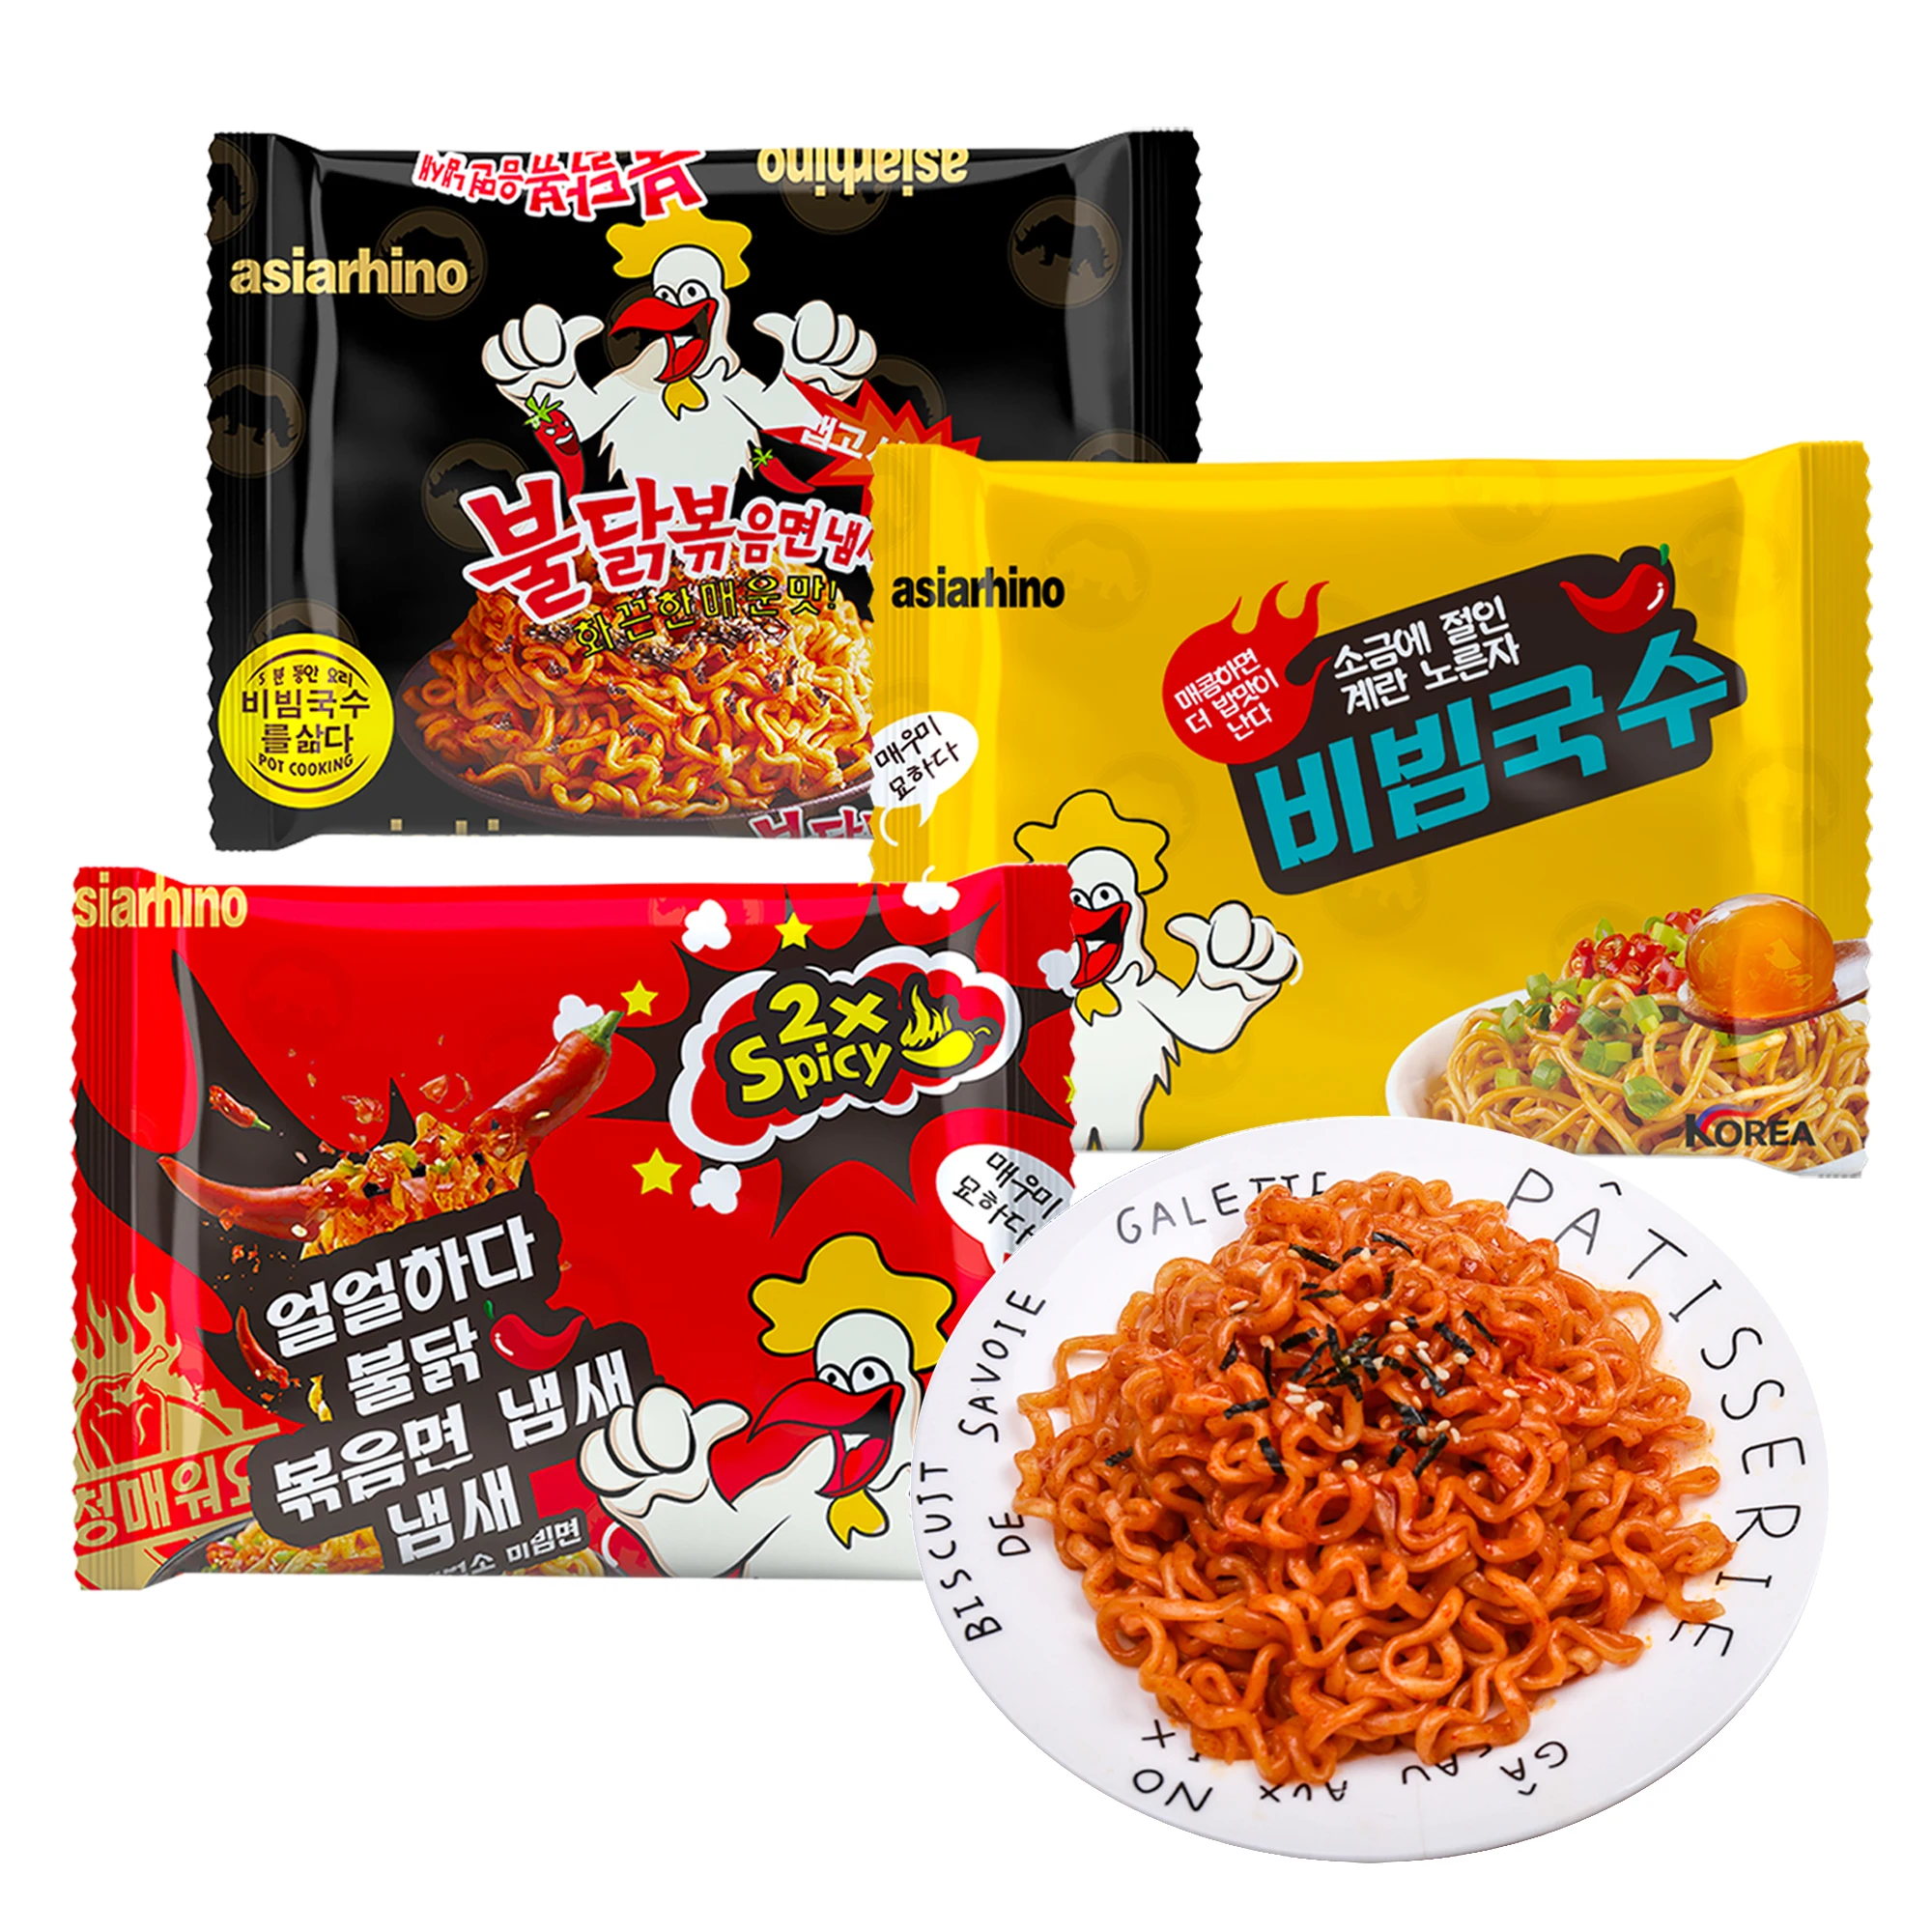 Taiwan Food Suppliers Ramen Noodles Comida China Picante Fideos Ramen Chinos Picantes Cheese Noodles Spicy Instant Noodles